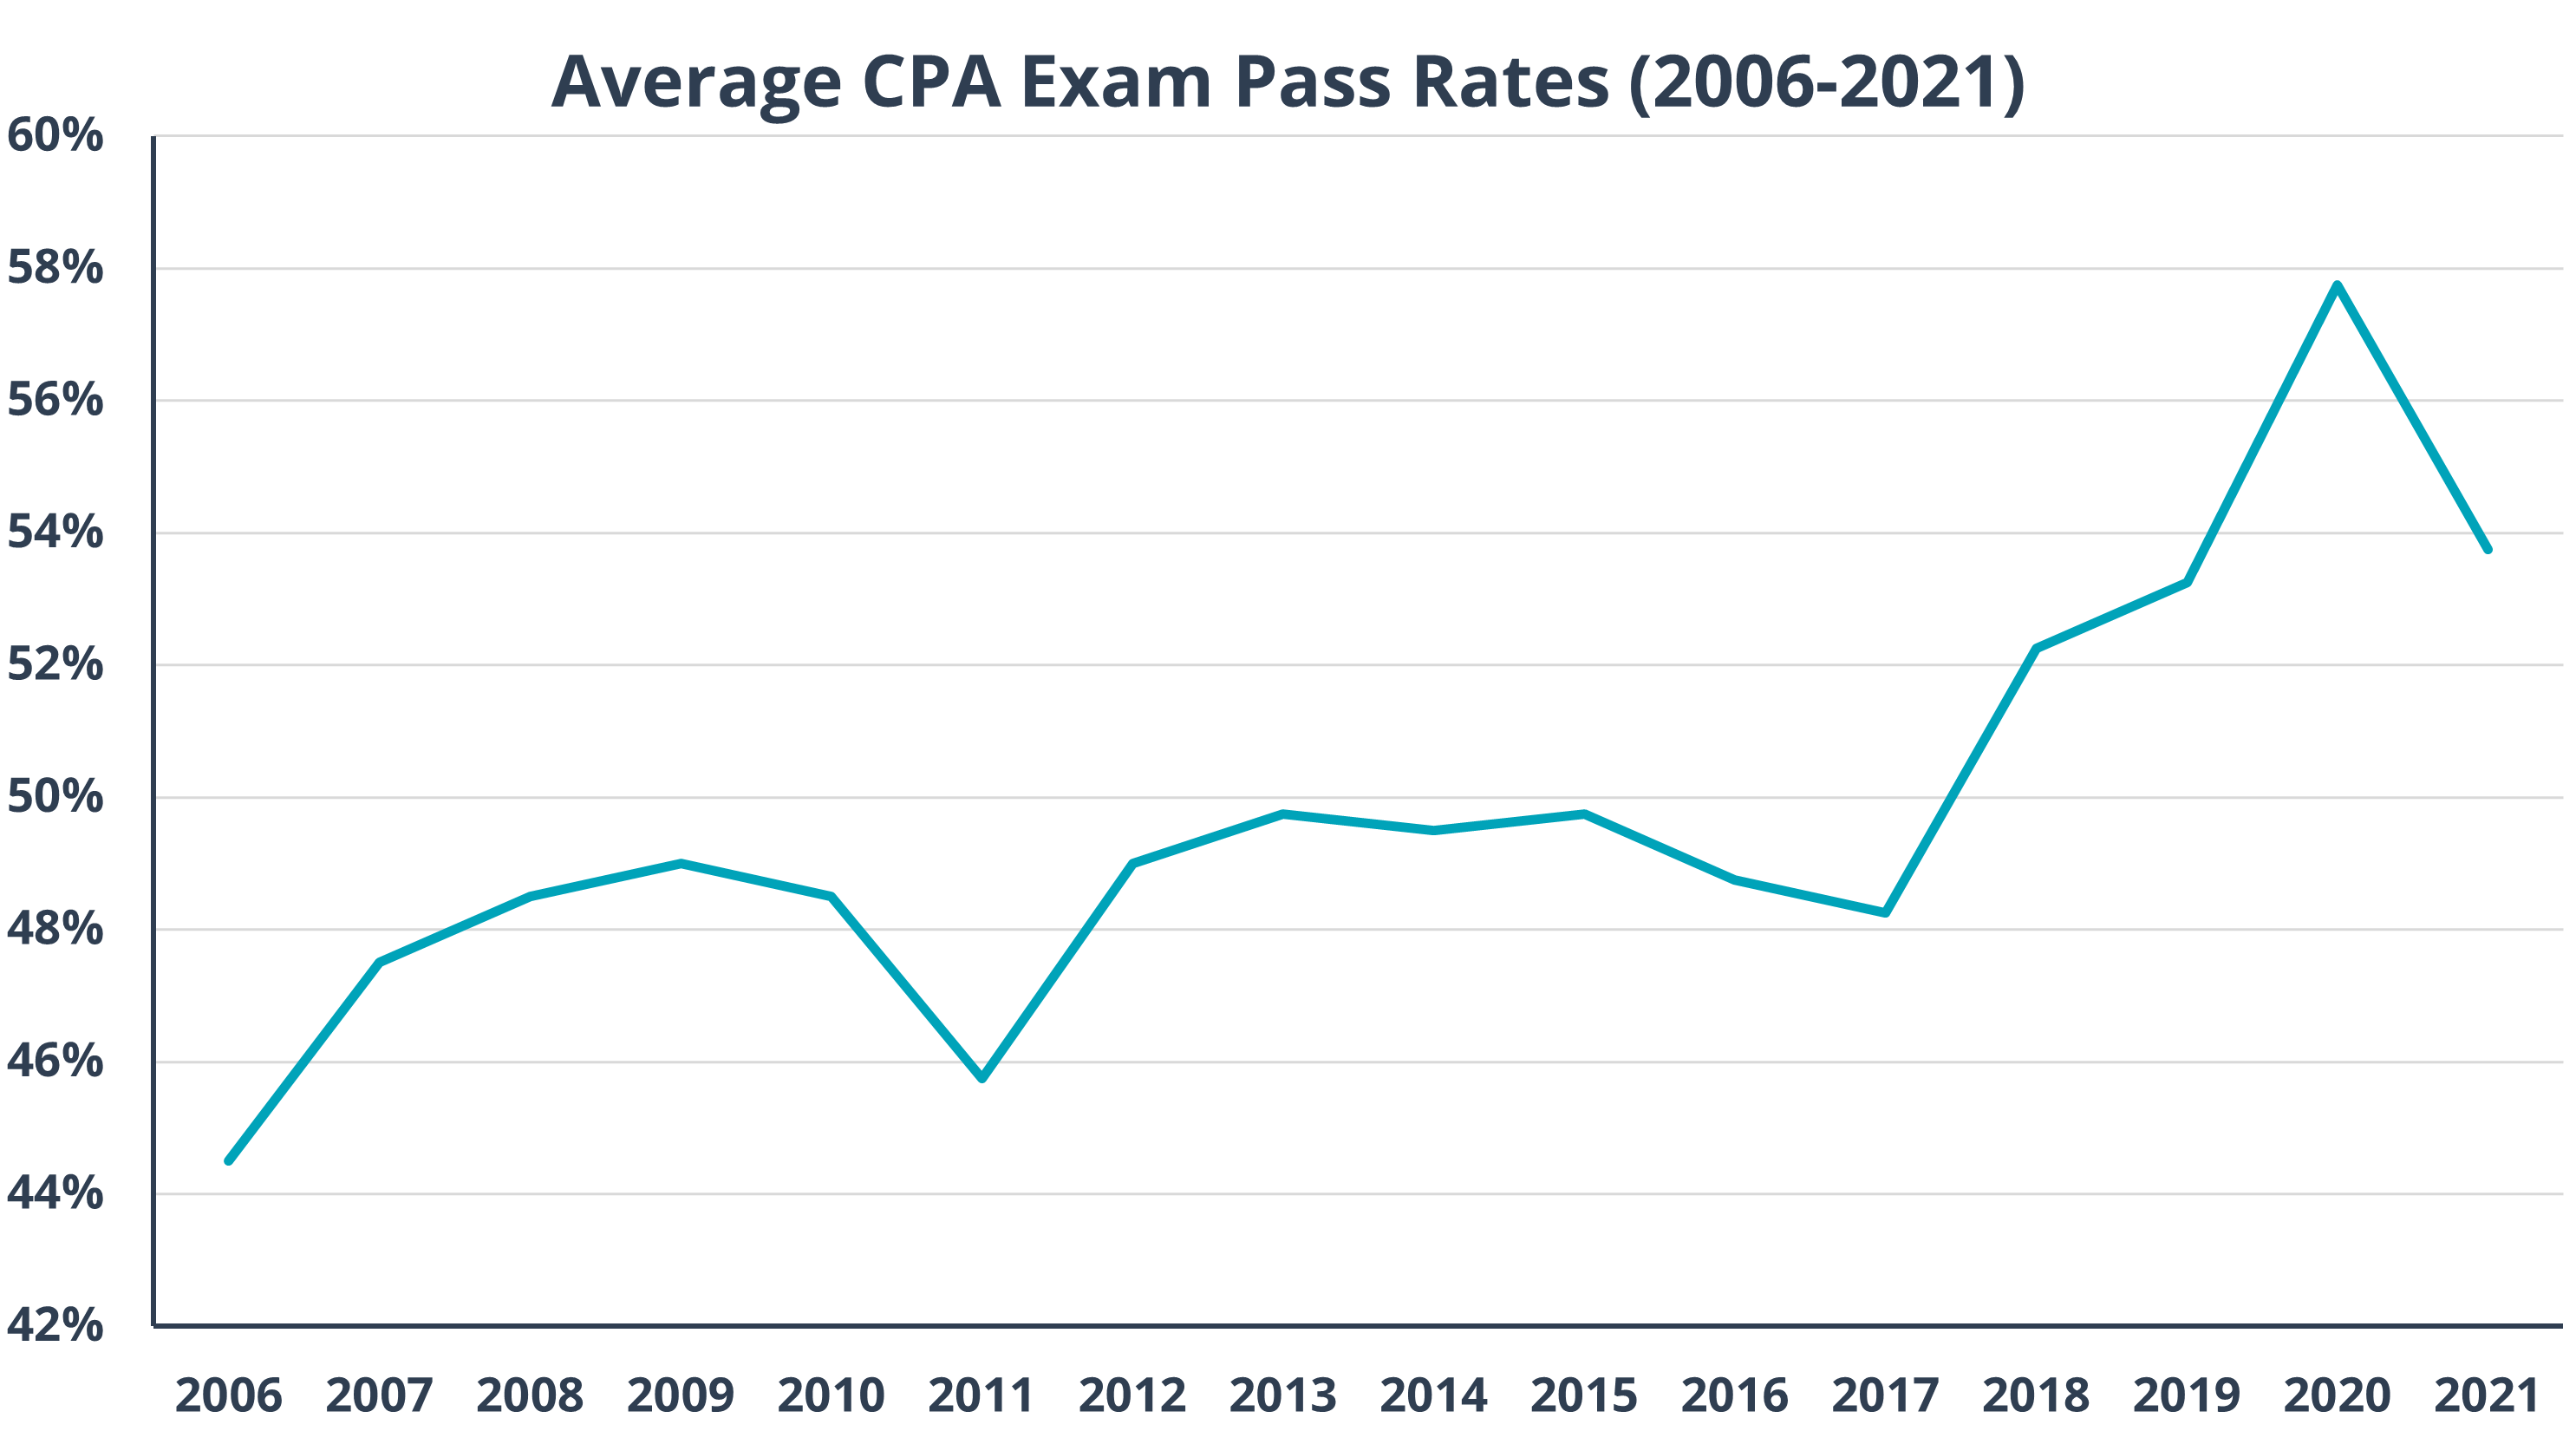 Line graph showing average CPA Exam pass rates from 2006-2021.